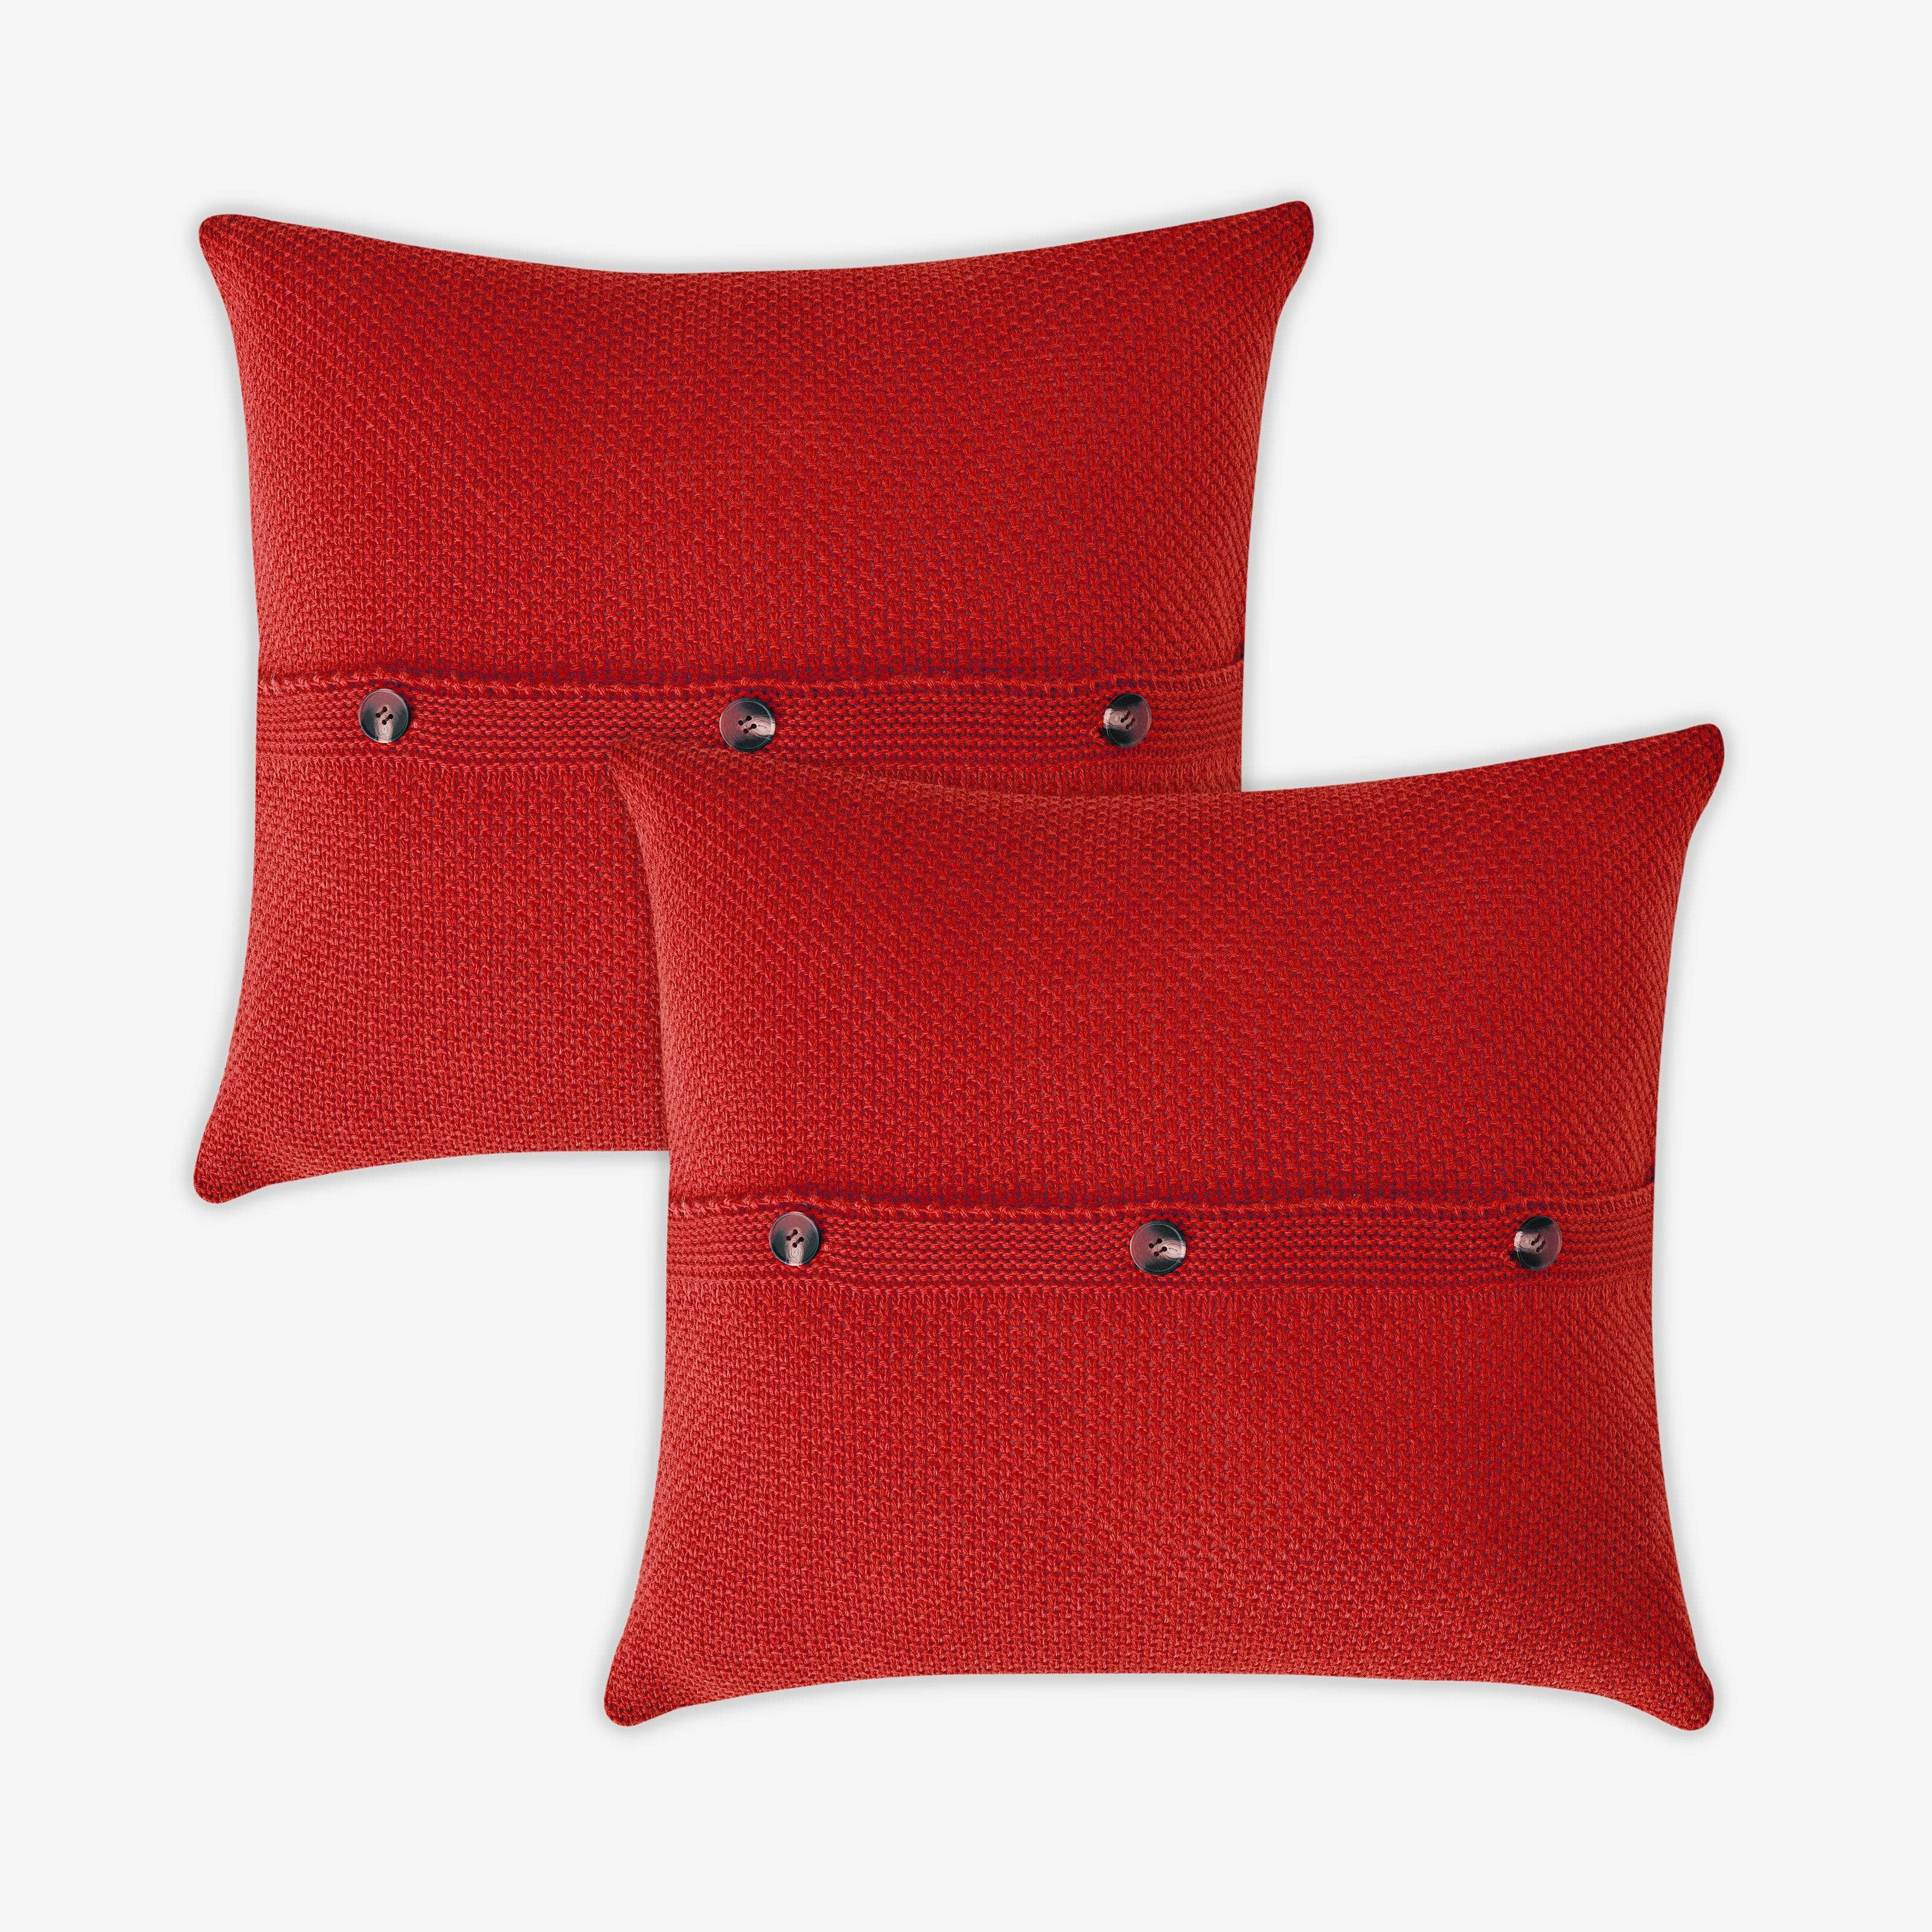 Benjamin Set of 2 Waffle Knitted Cushion Covers, Red